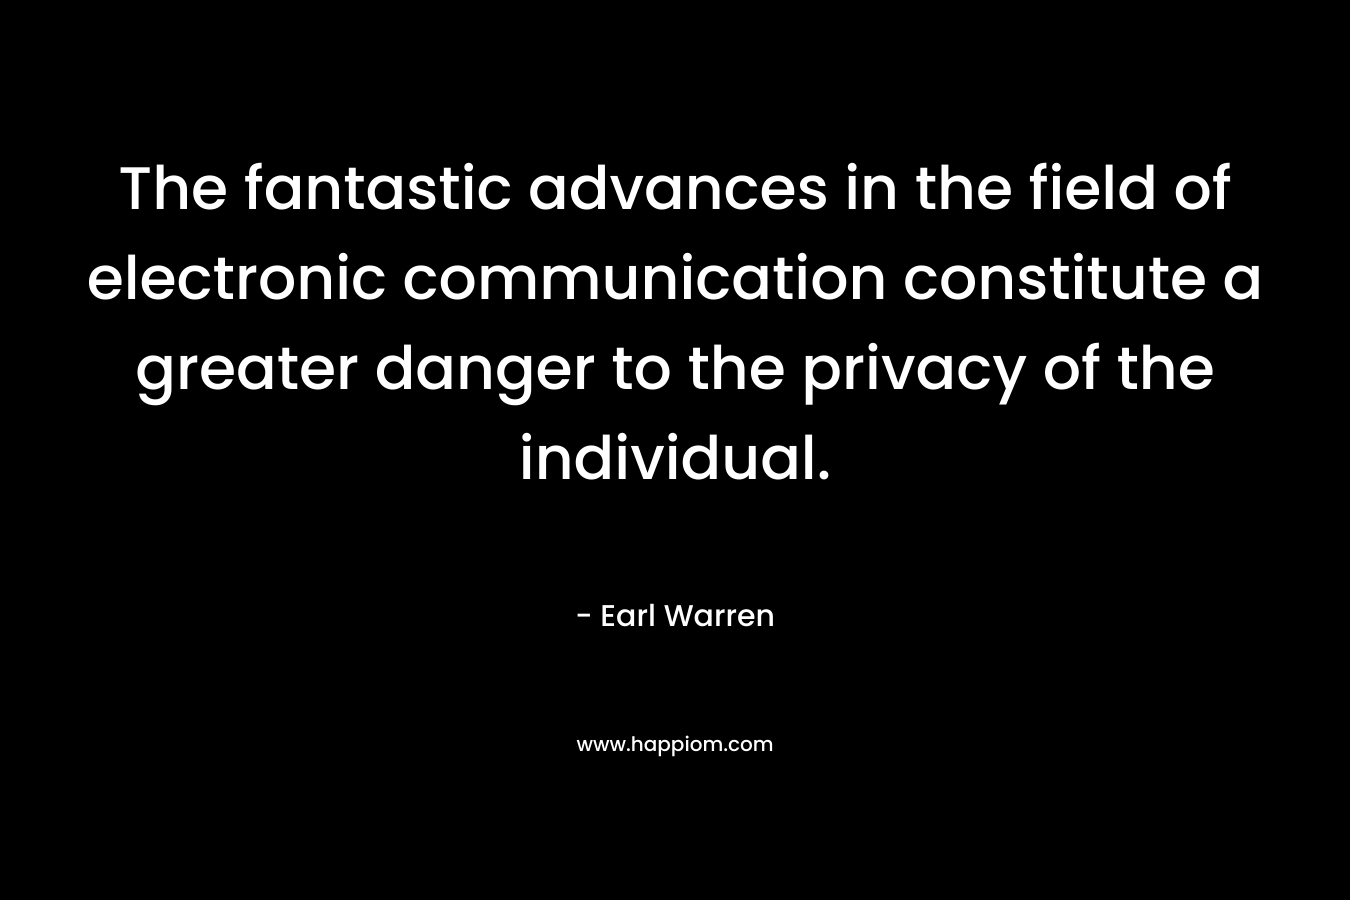 The fantastic advances in the field of electronic communication constitute a greater danger to the privacy of the individual. – Earl Warren